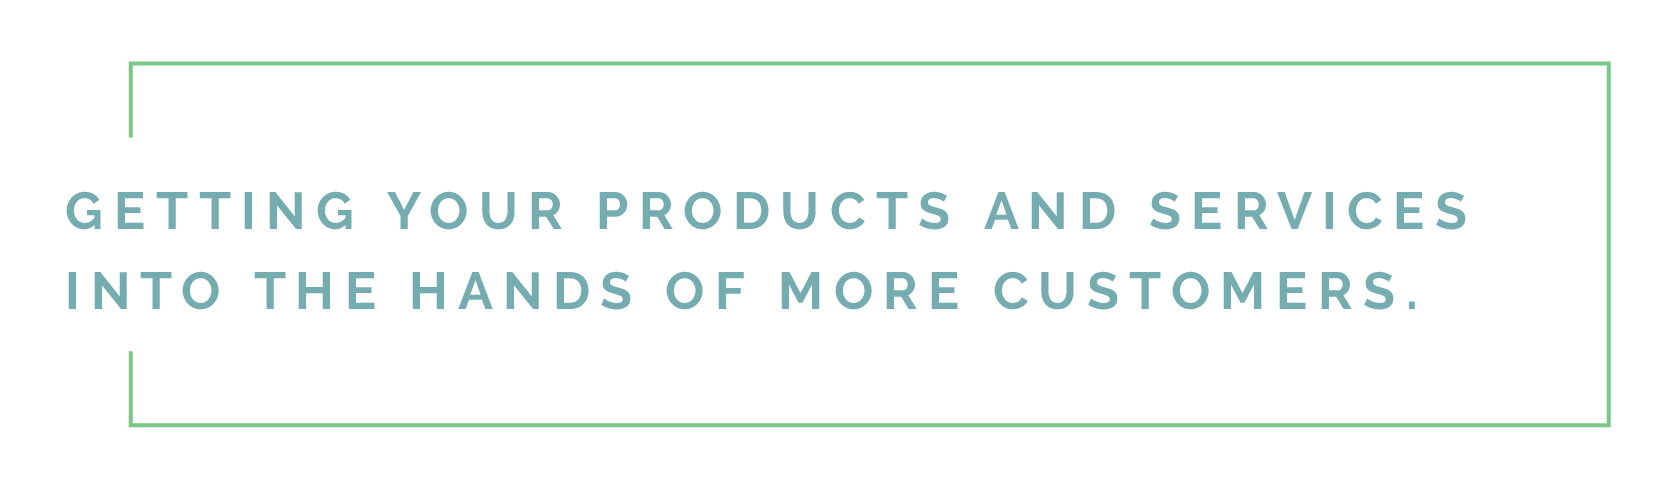 Products and services callout quote graphic